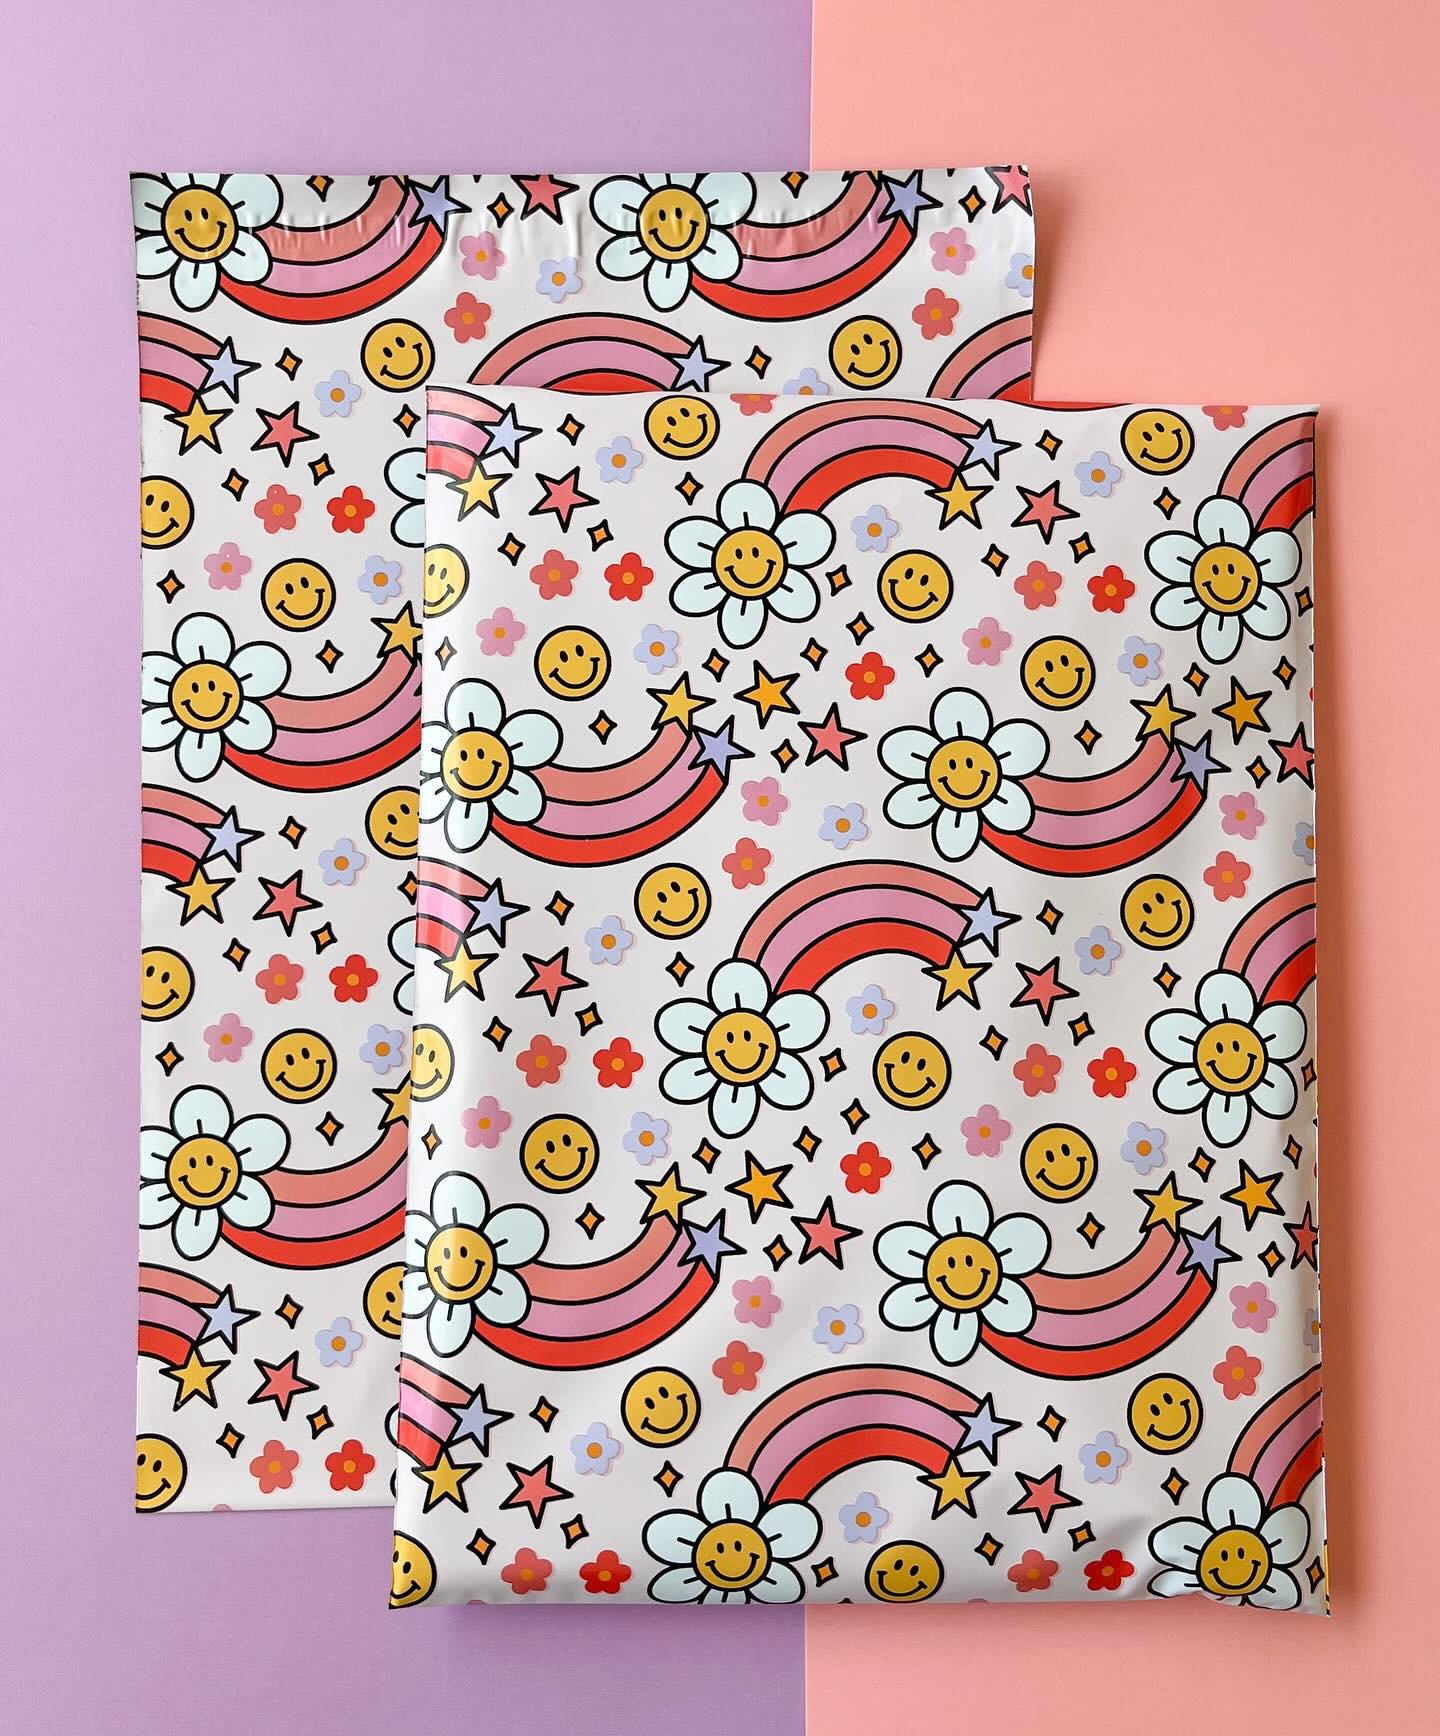 ✨NOW AVAILABLE!✨ New poly mailers, insert cards, and sticker rolls are on the site and ready to ship! This collection brings me so much joy &amp; I&rsquo;m already so excited for y&rsquo;all to get your packages!!💖🌼🌈⭐️ 

Special shoutout to @roxan